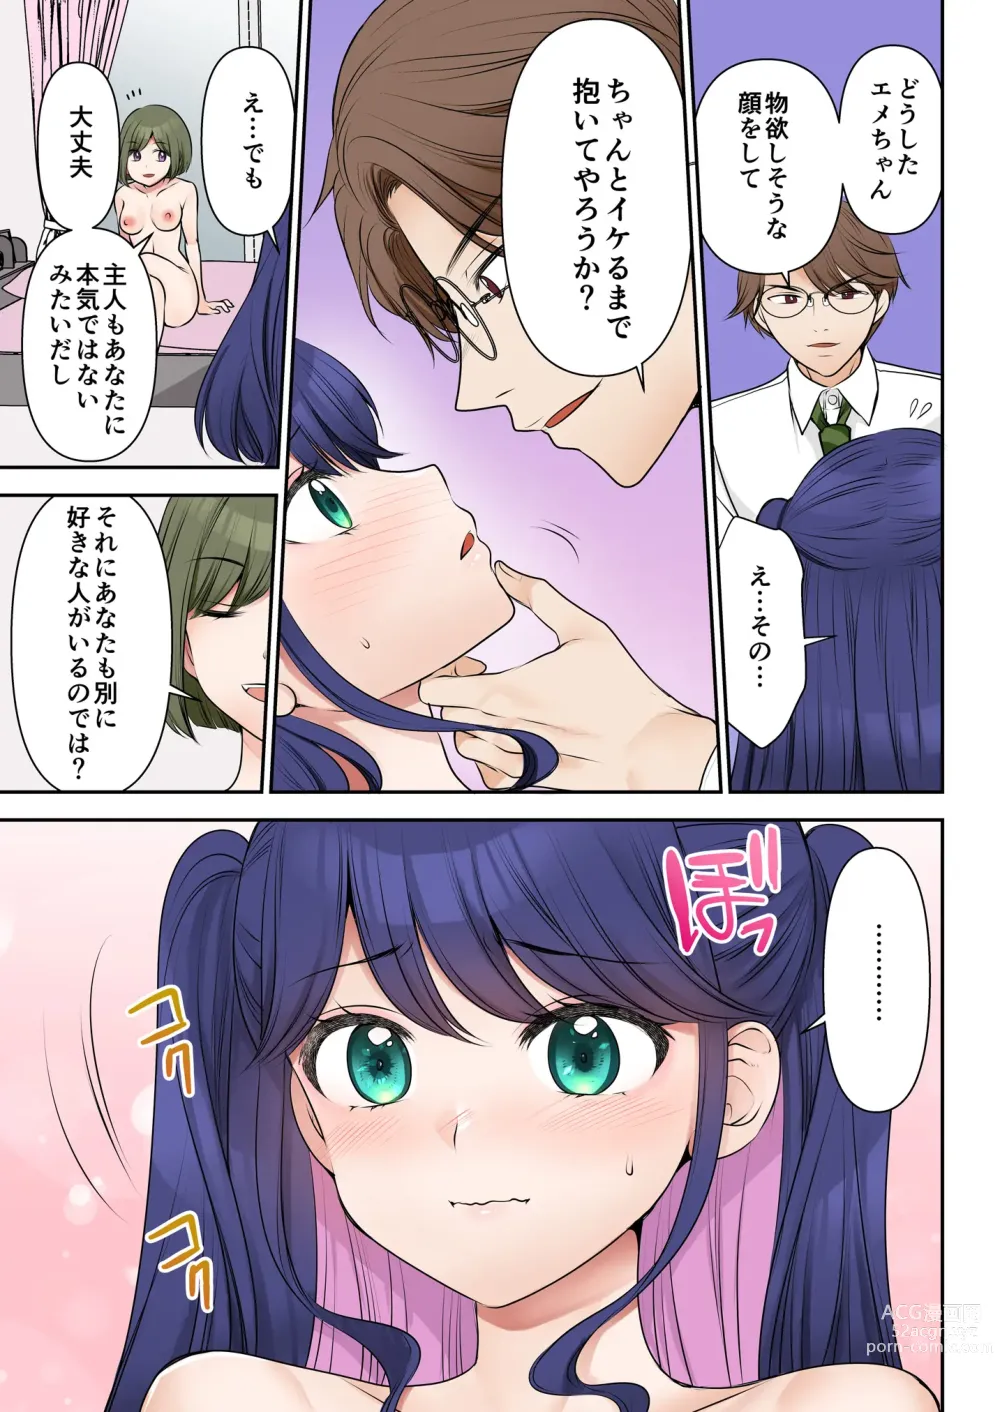 Page 40 of manga Life-changing contract president♂→sex secretary♀